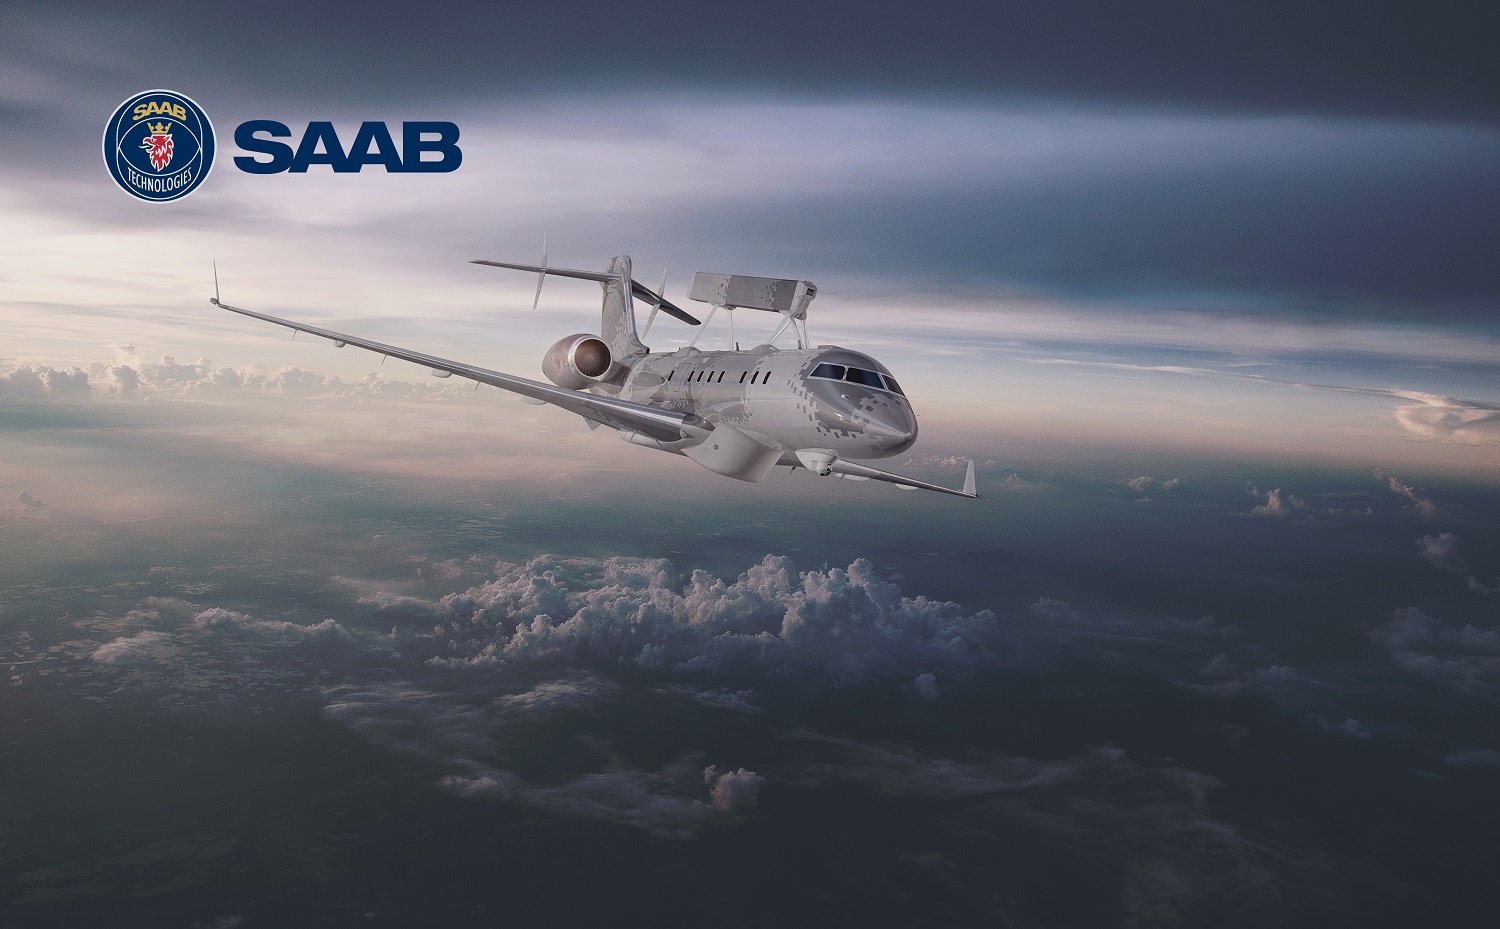 Saab’s GlobalEye Airborne Early Warning and Control (AEW&C) Aircraft